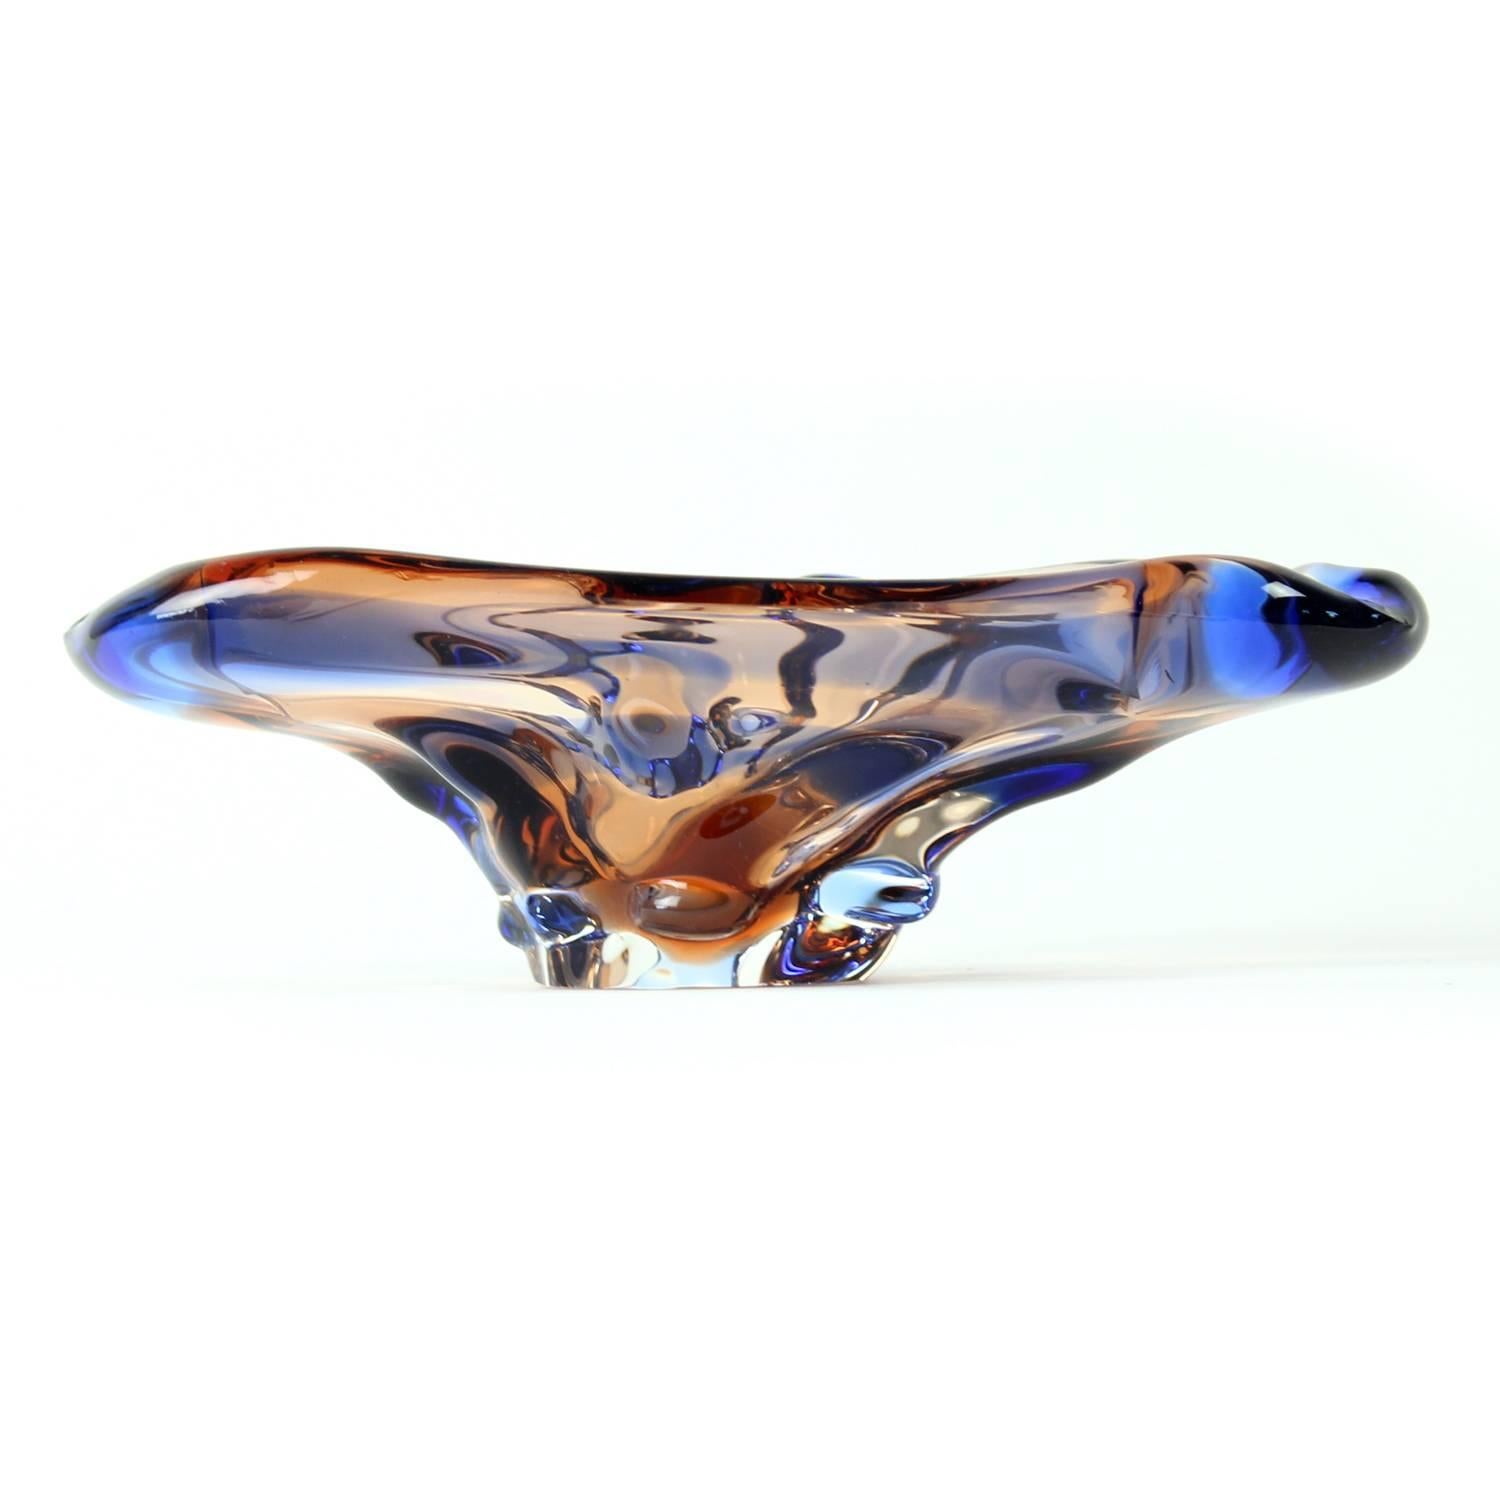 This beautiful art glass bowl is trully one of a kind addition of the famous Czech glass production. It was designed by Frantisek Zemek for Mstisov glass union as a part of the Niagara series. It combines the rosaline pink with clear white glass,